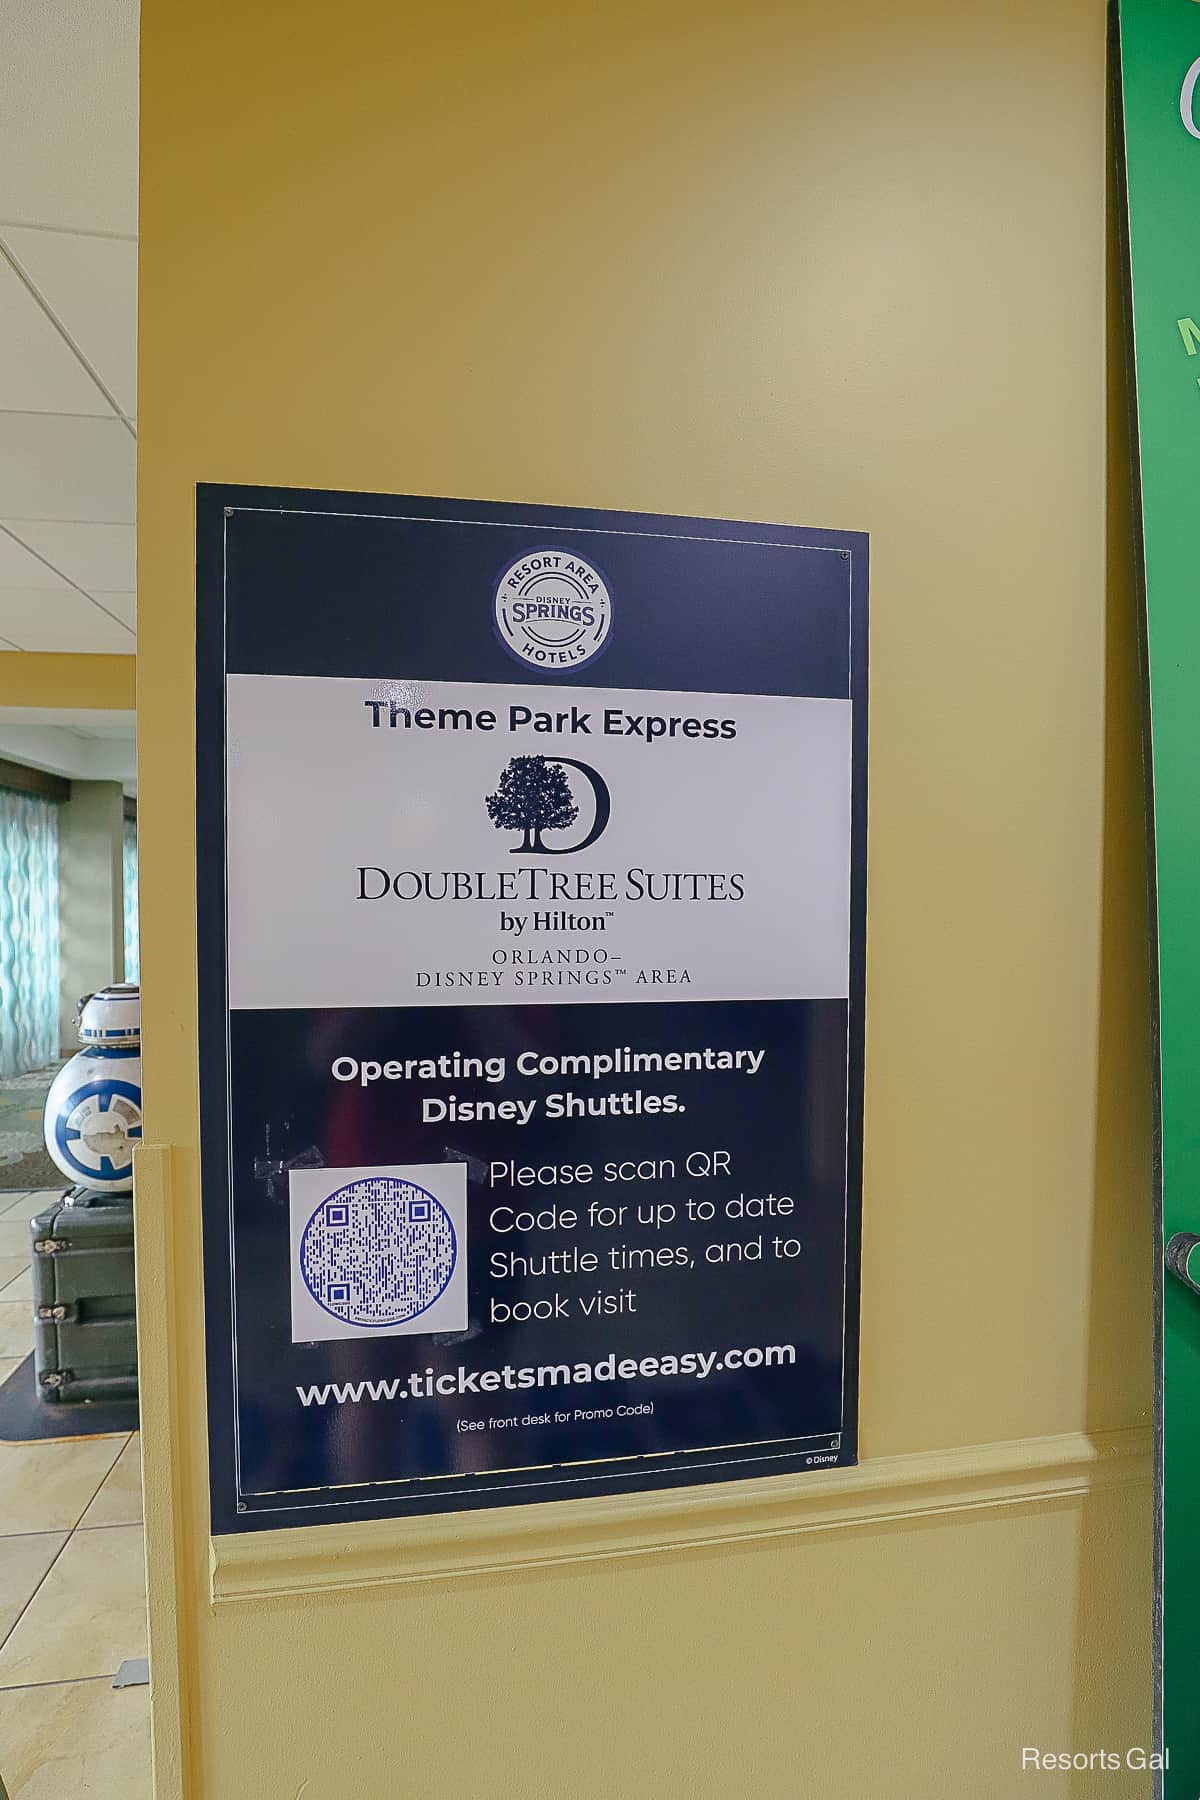 Posted DoubleTree Suites by Hilton Shuttle Service during stay 